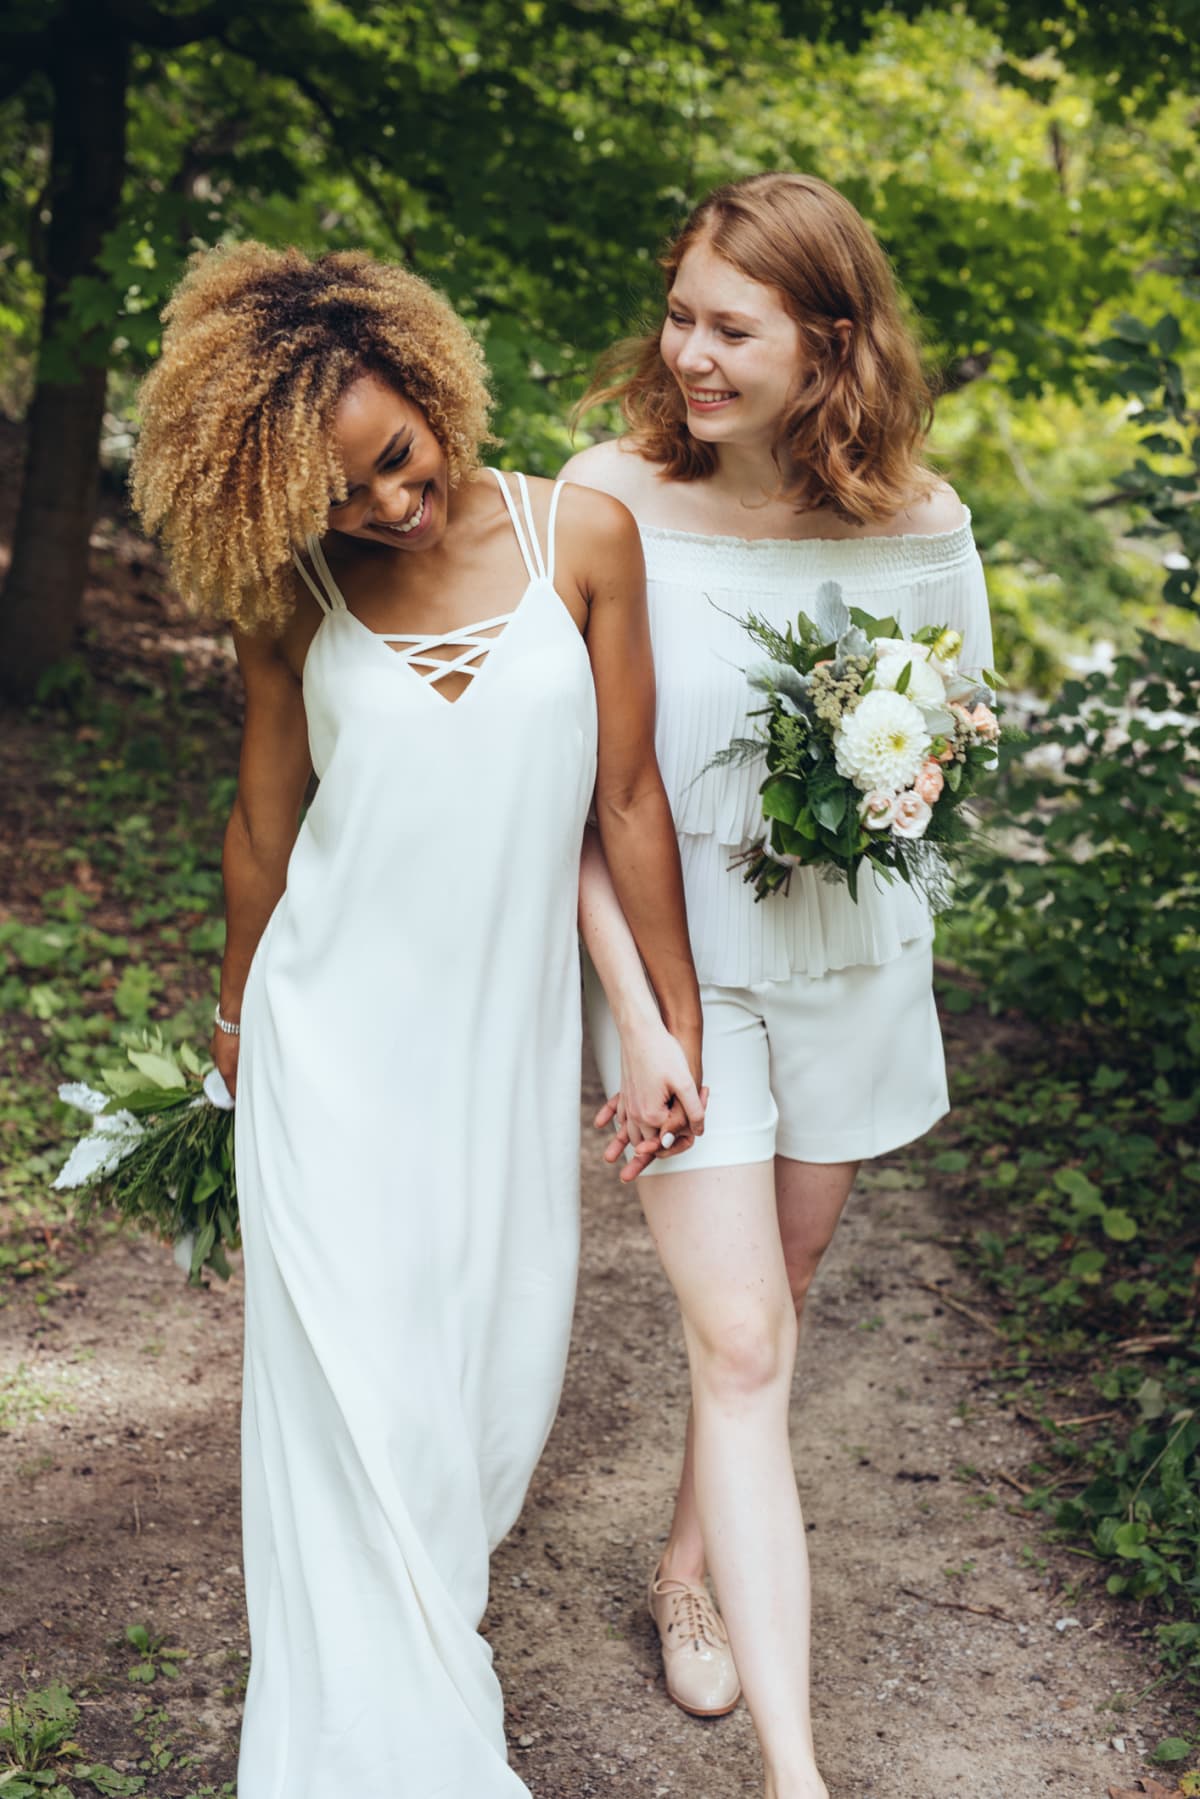 Two women wearing white wedding dresses as they elope